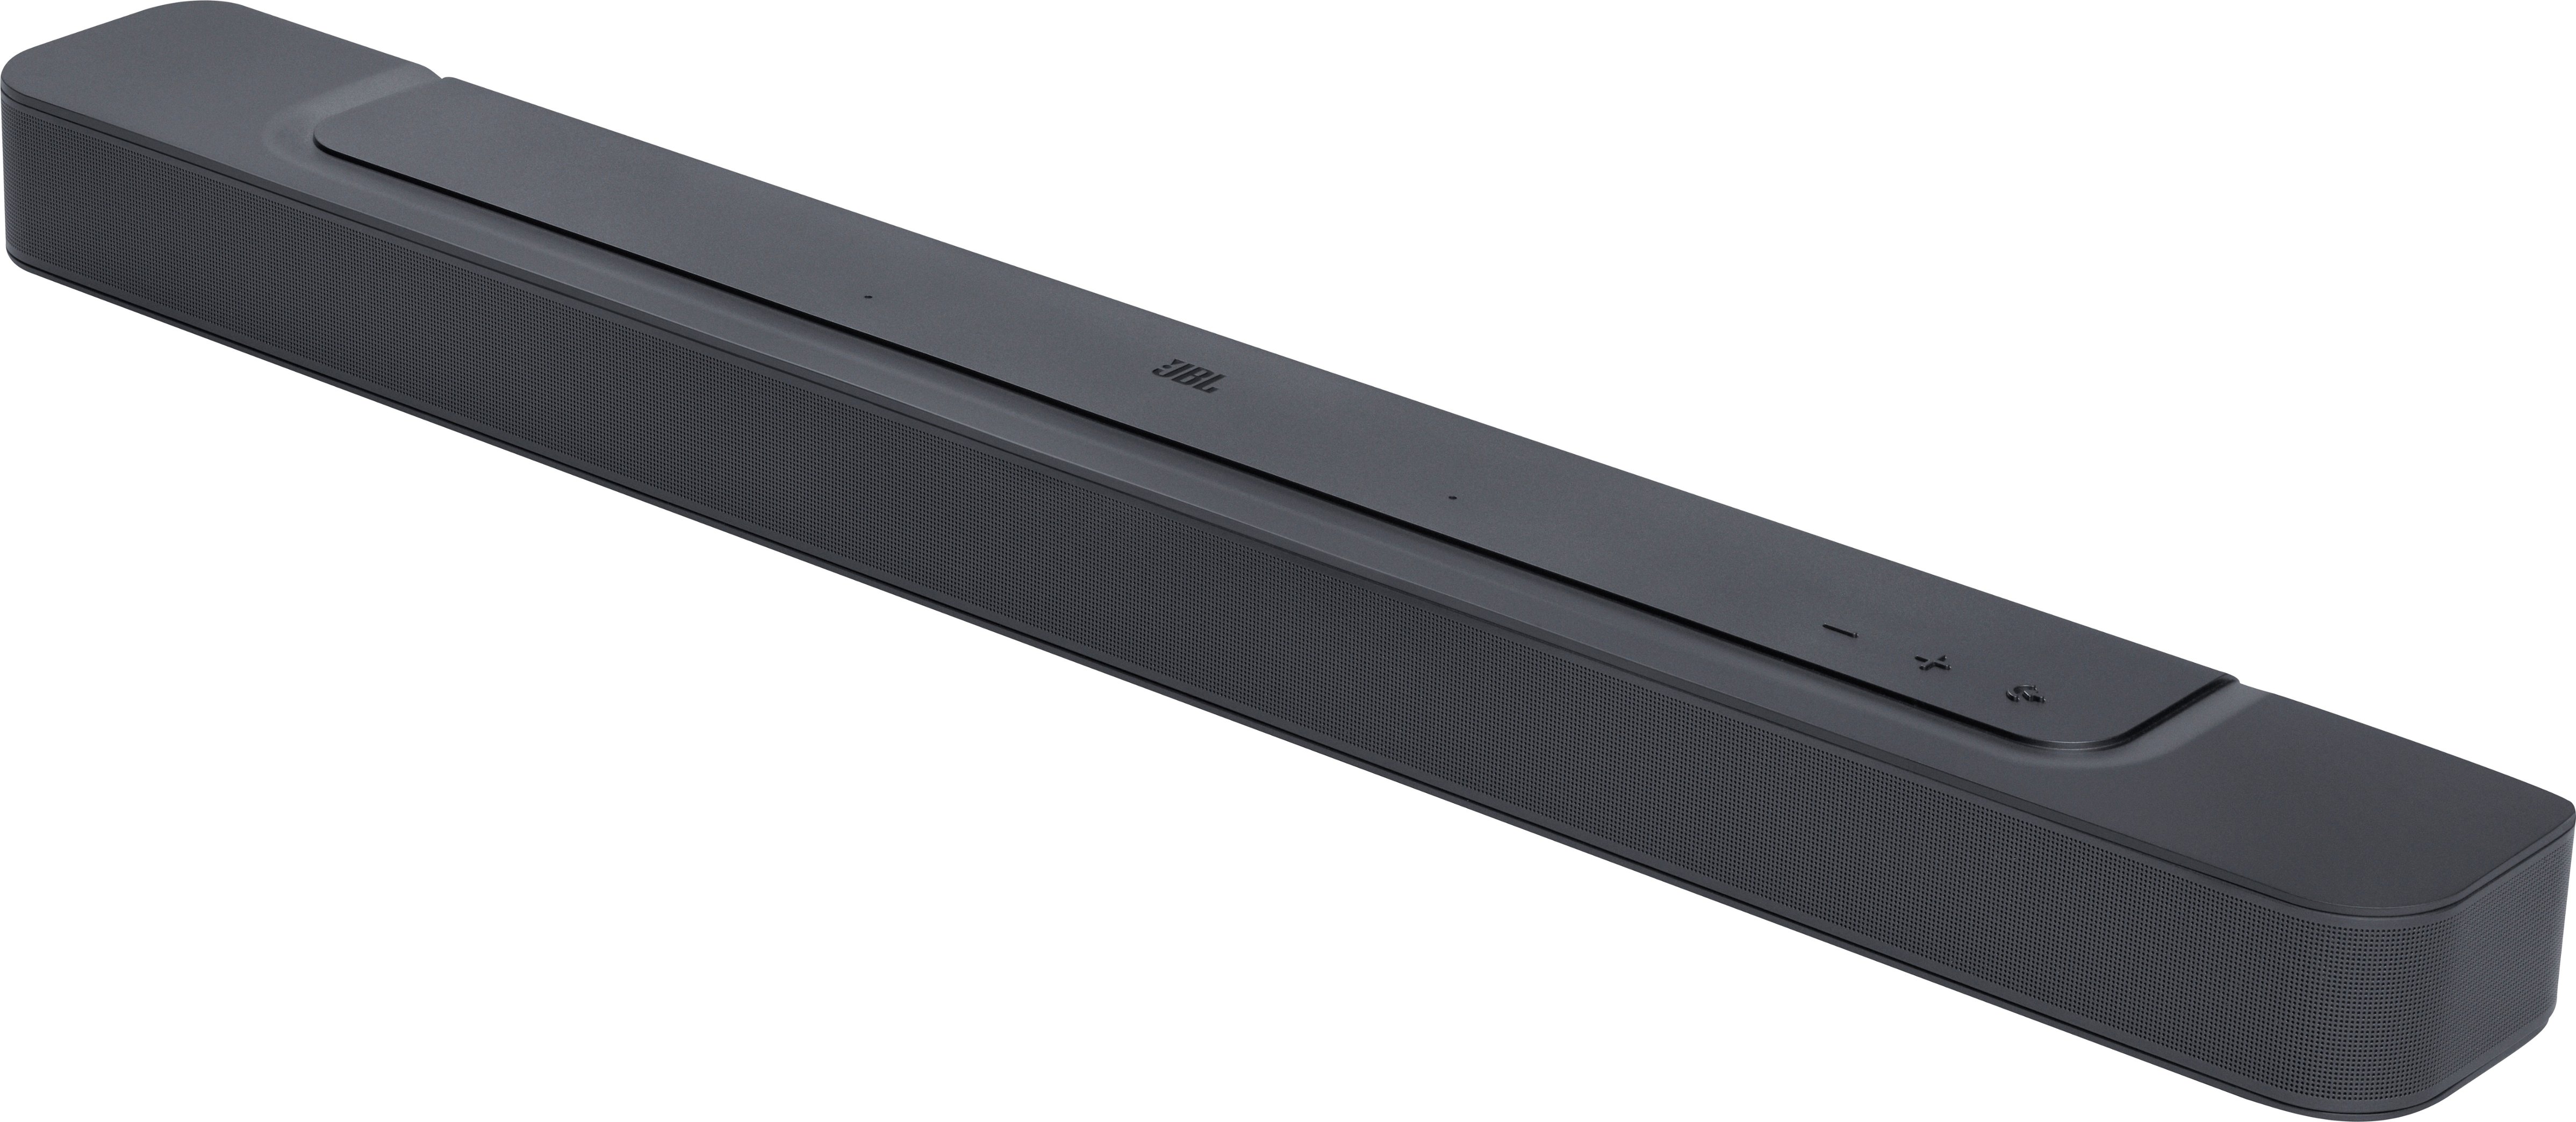 JBL BAR 300 5.0ch Compact All-In-One Soundbar with MultiBeam and 